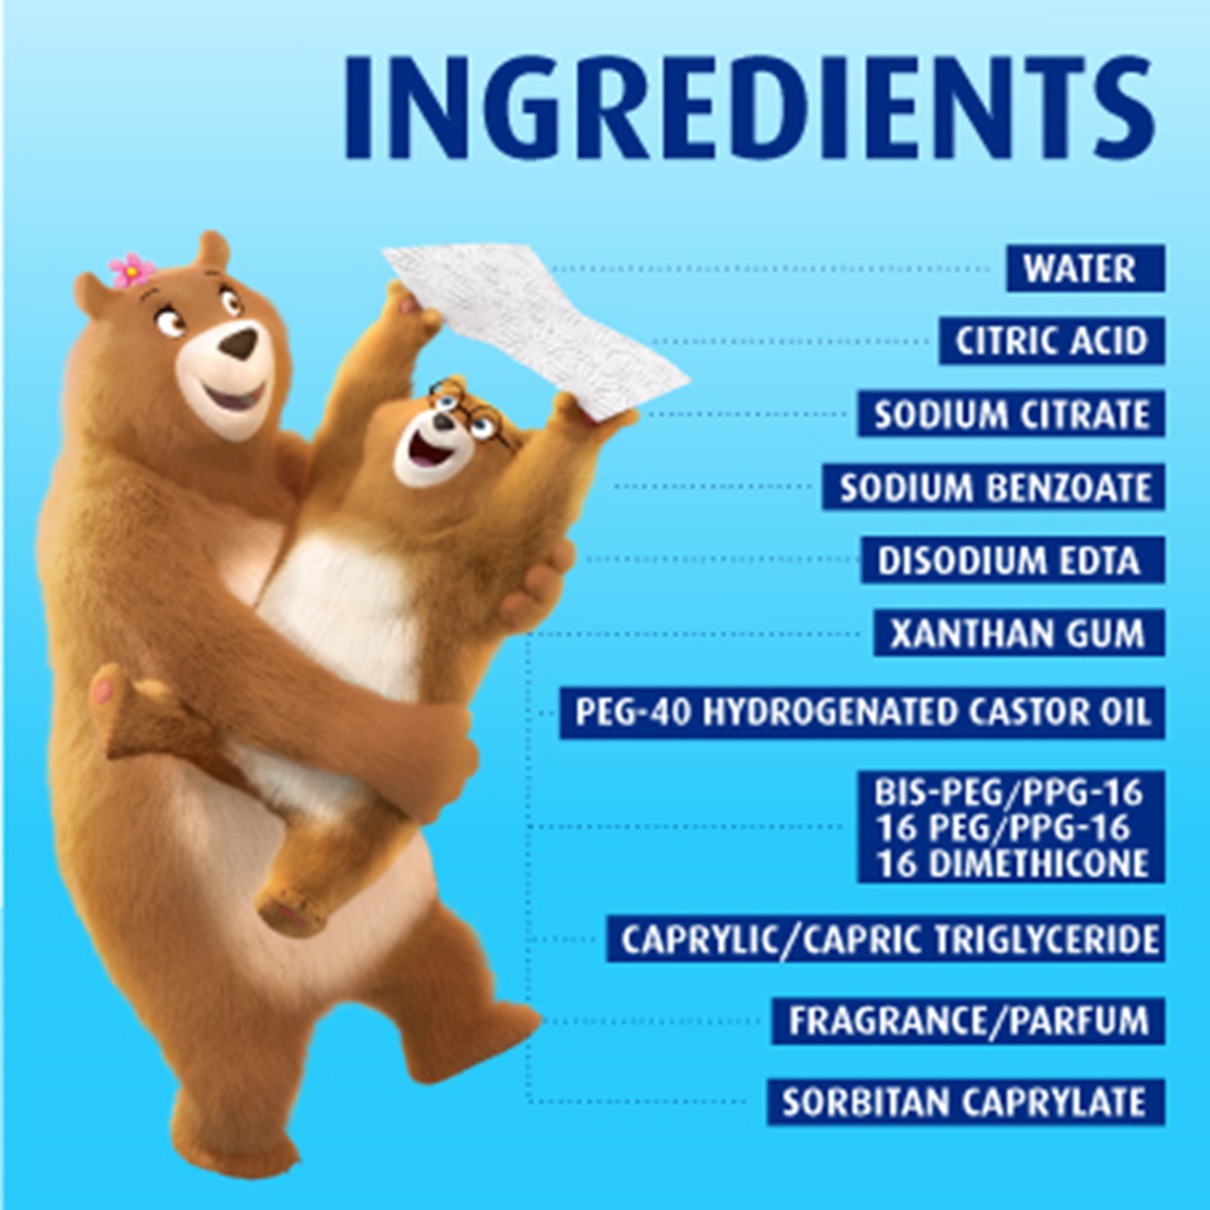 Ingredients used in flushable toilet wipes